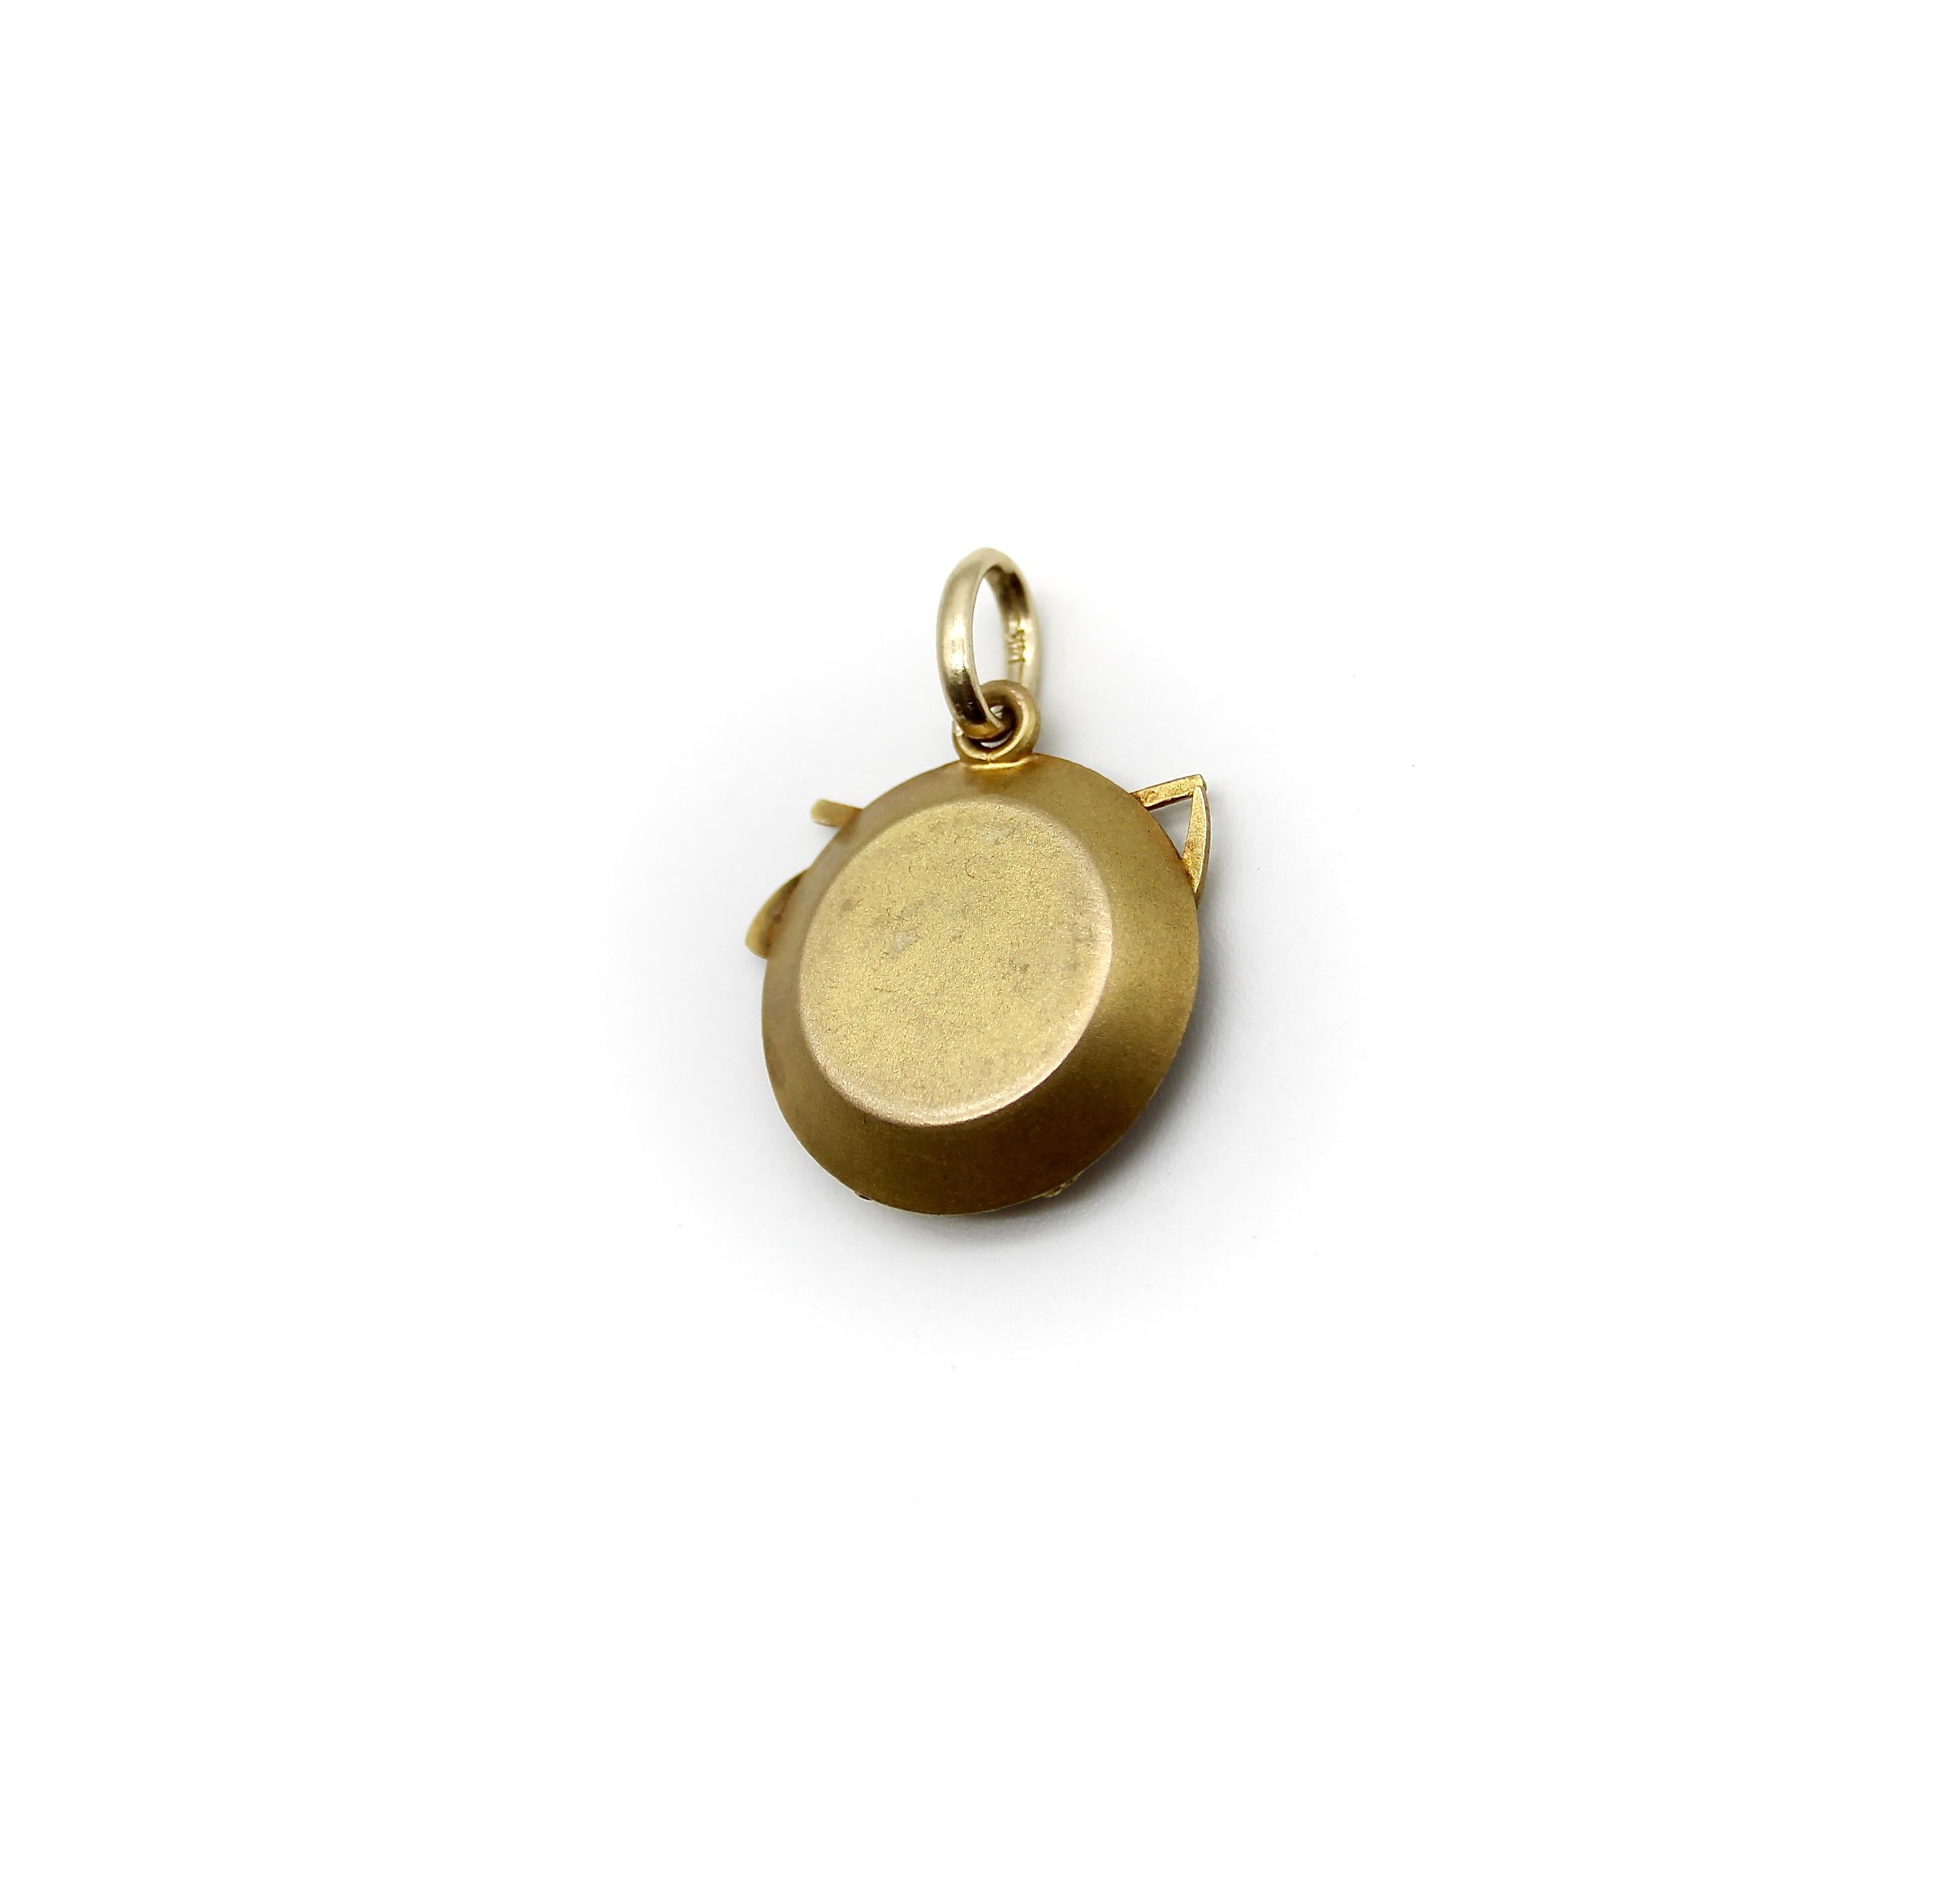 This 14k gold charm is a three dimensional rendering of a prospector’s tools. A shovel and pick-axe make a crisscross above a rope pulley system. Beneath them—as if underground—are several tiny gold nuggets, waiting to be mined. Each element of the